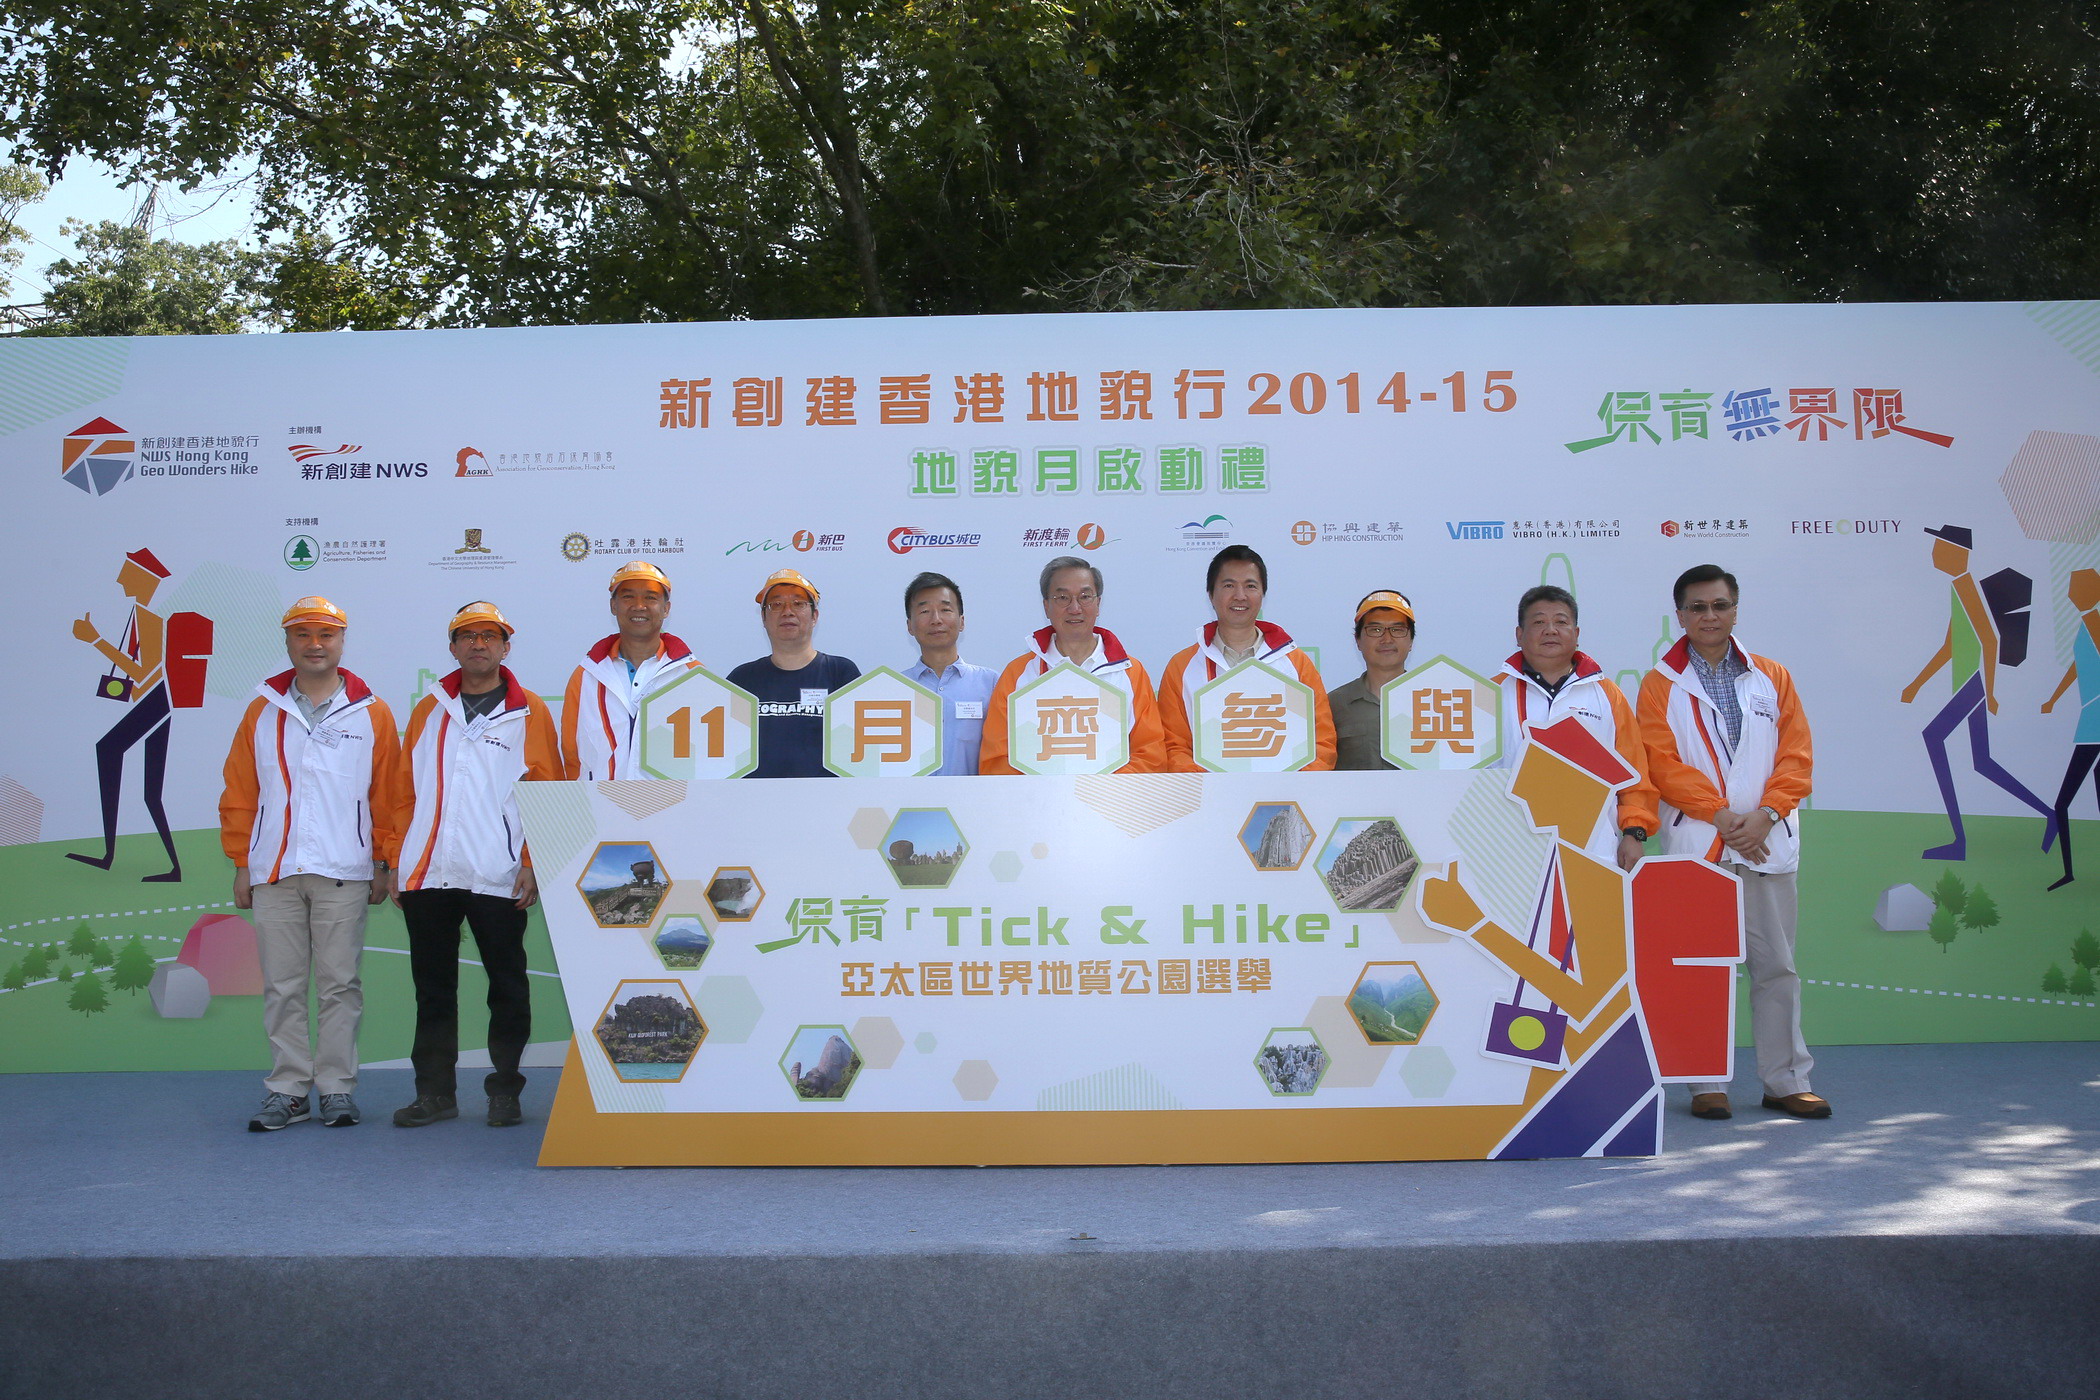 Annual NWS Hong Kong Geo Wonders Hike kicks off with multi-faceted community events